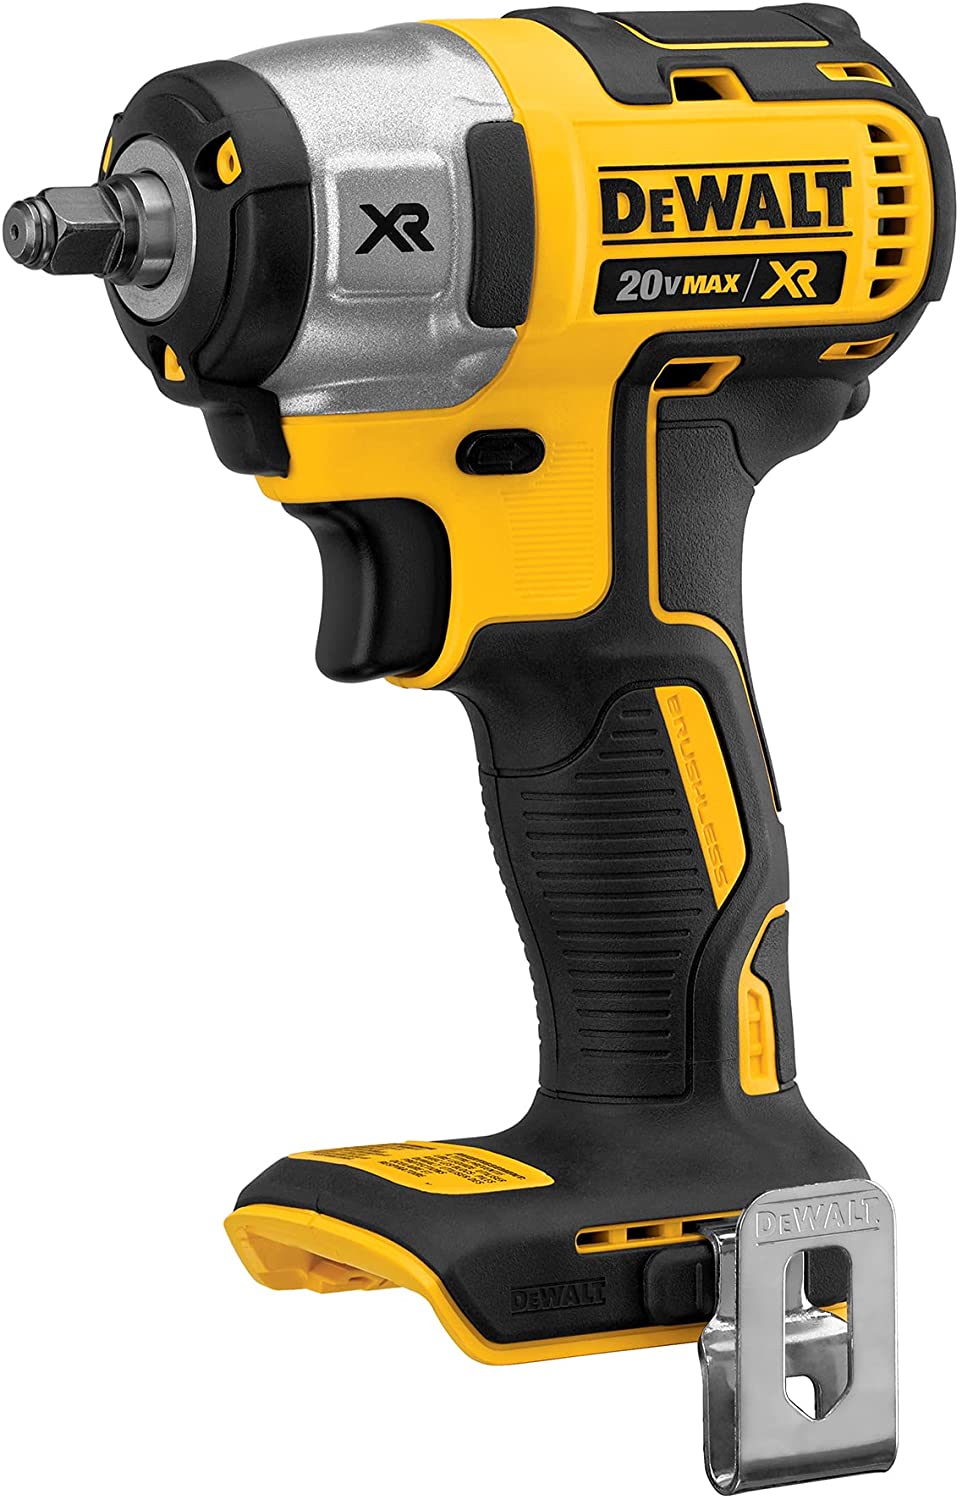 Have en picnic Bloodstained Validering DeWalt 20V MAX* XR® 3/8" Compact Impact Wrench (Bare Tool) – 1 Top Tools